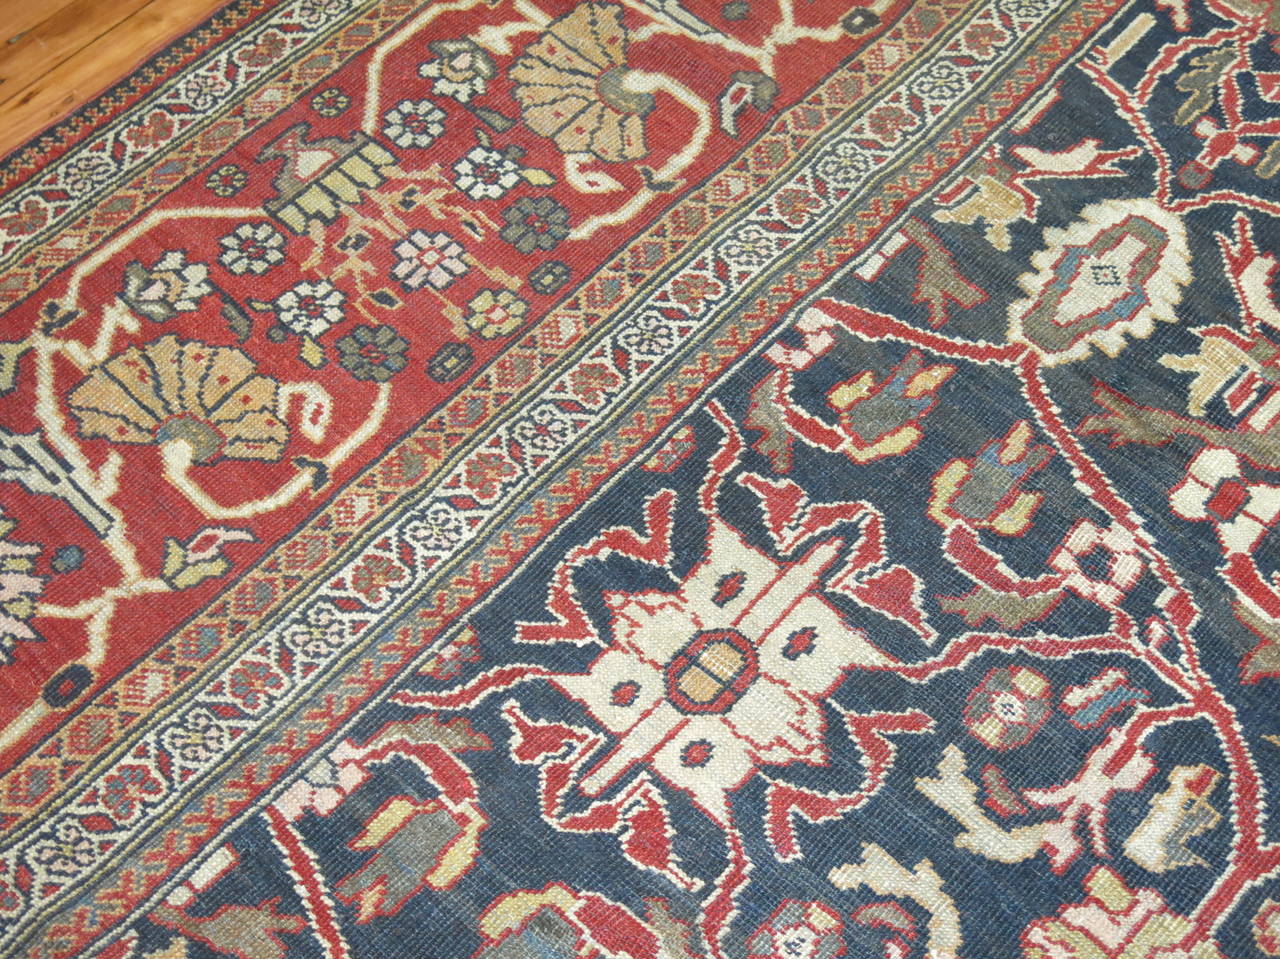 A late 19th century Persian Sultanabad rug featuring a bold masculine all-over motif on a steel blue ground surrounded by a soft red border.